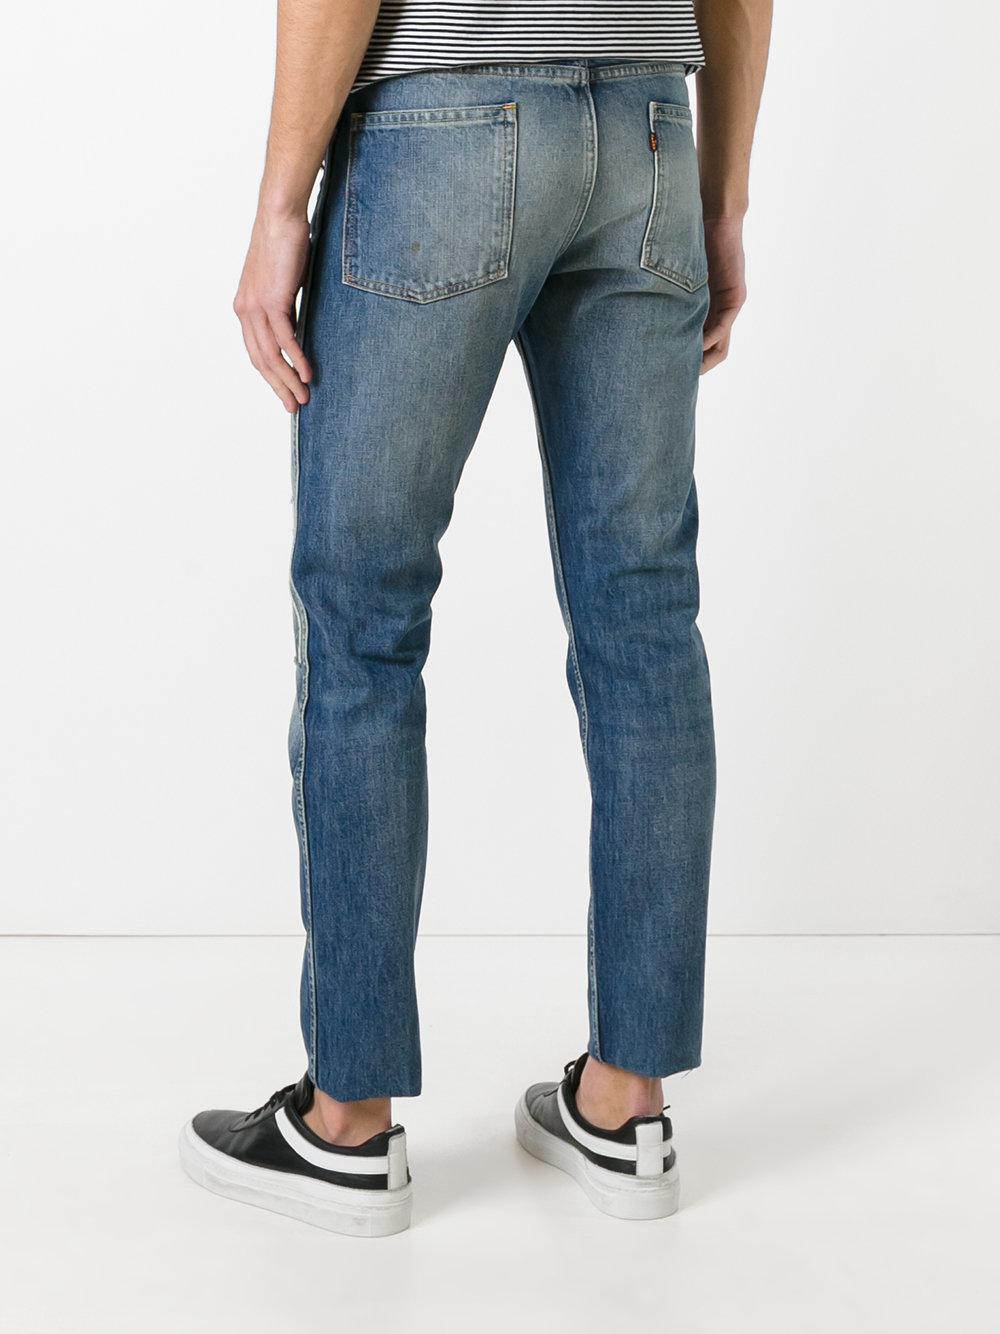 Levi's Denim Patchwork Detail Tapered Jeans in Blue for Men - Lyst